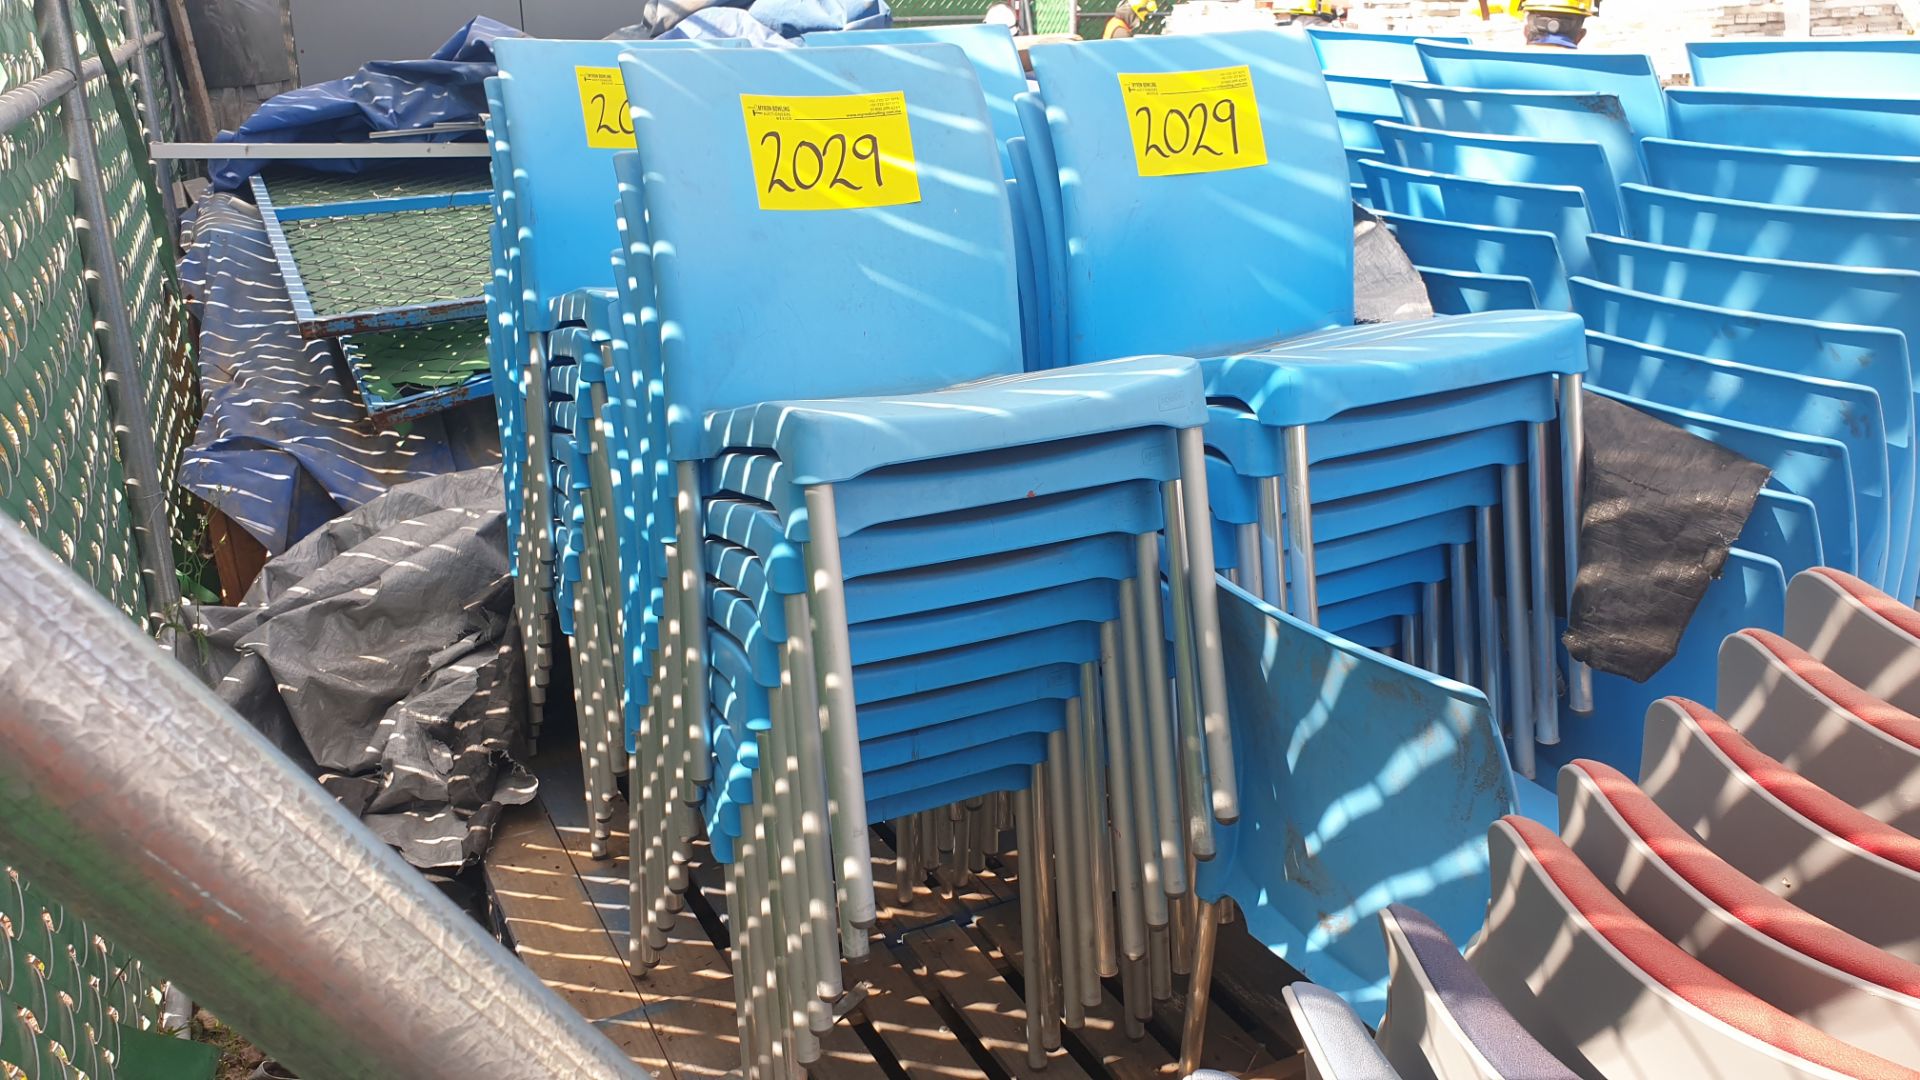 1 Lote of 40 blue plastic chairs, 7 metal chairs for office with backrest and upholstered seat - Bild 10 aus 22